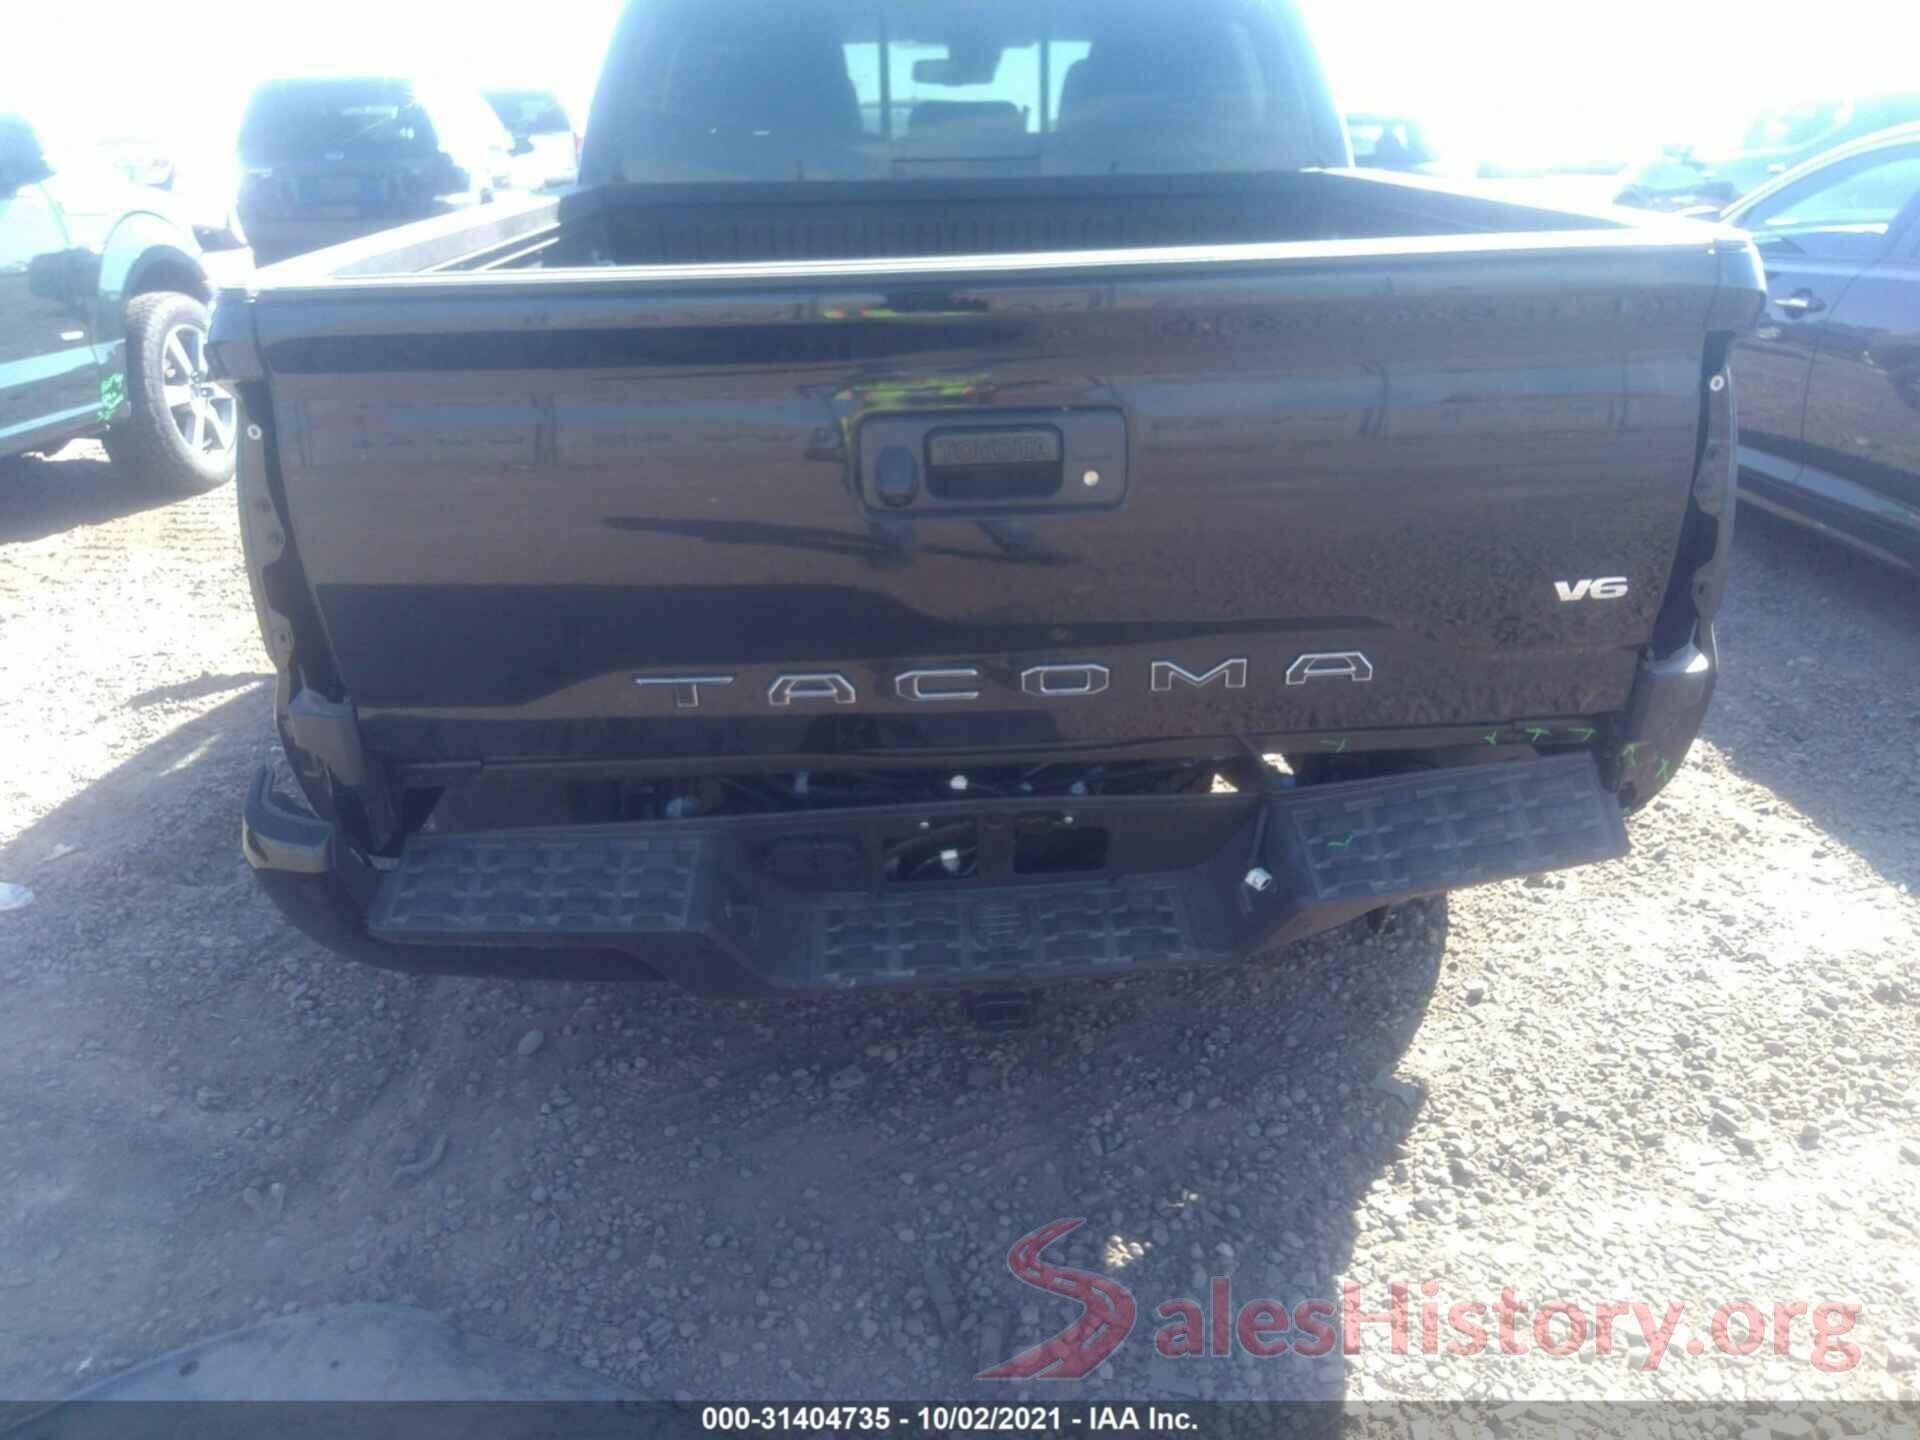 3TMCZ5ANXLM366110 2020 TOYOTA TACOMA 4WD